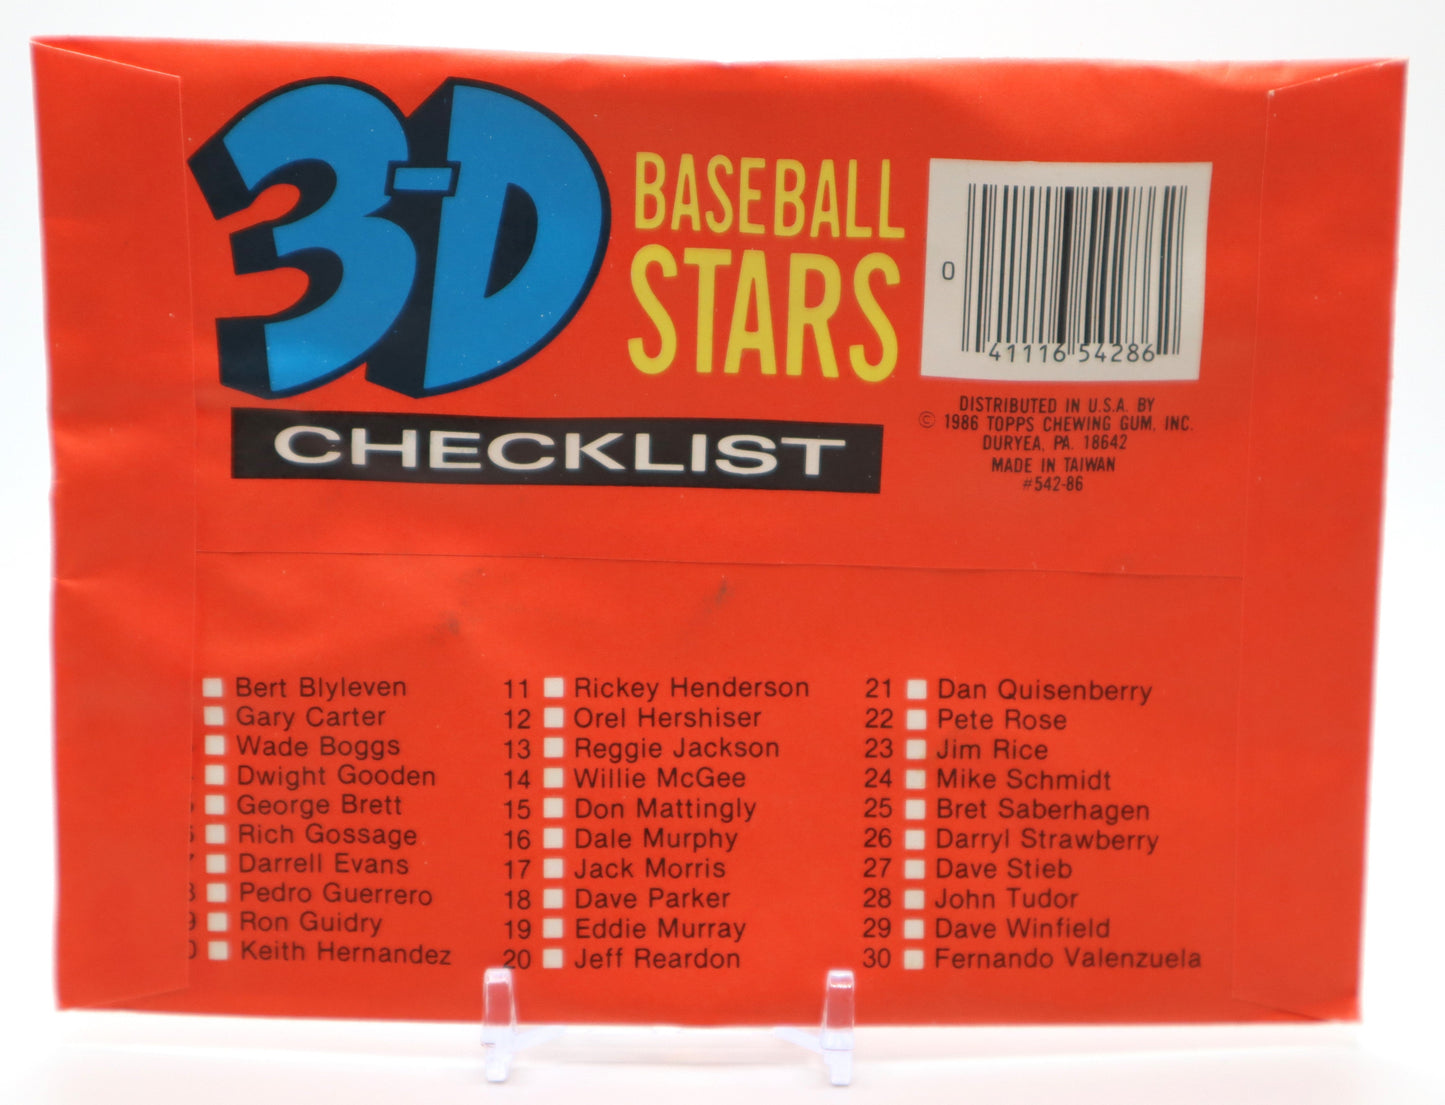 1986 Topps 3D Baseball Cards Wax Pack - Collectibles